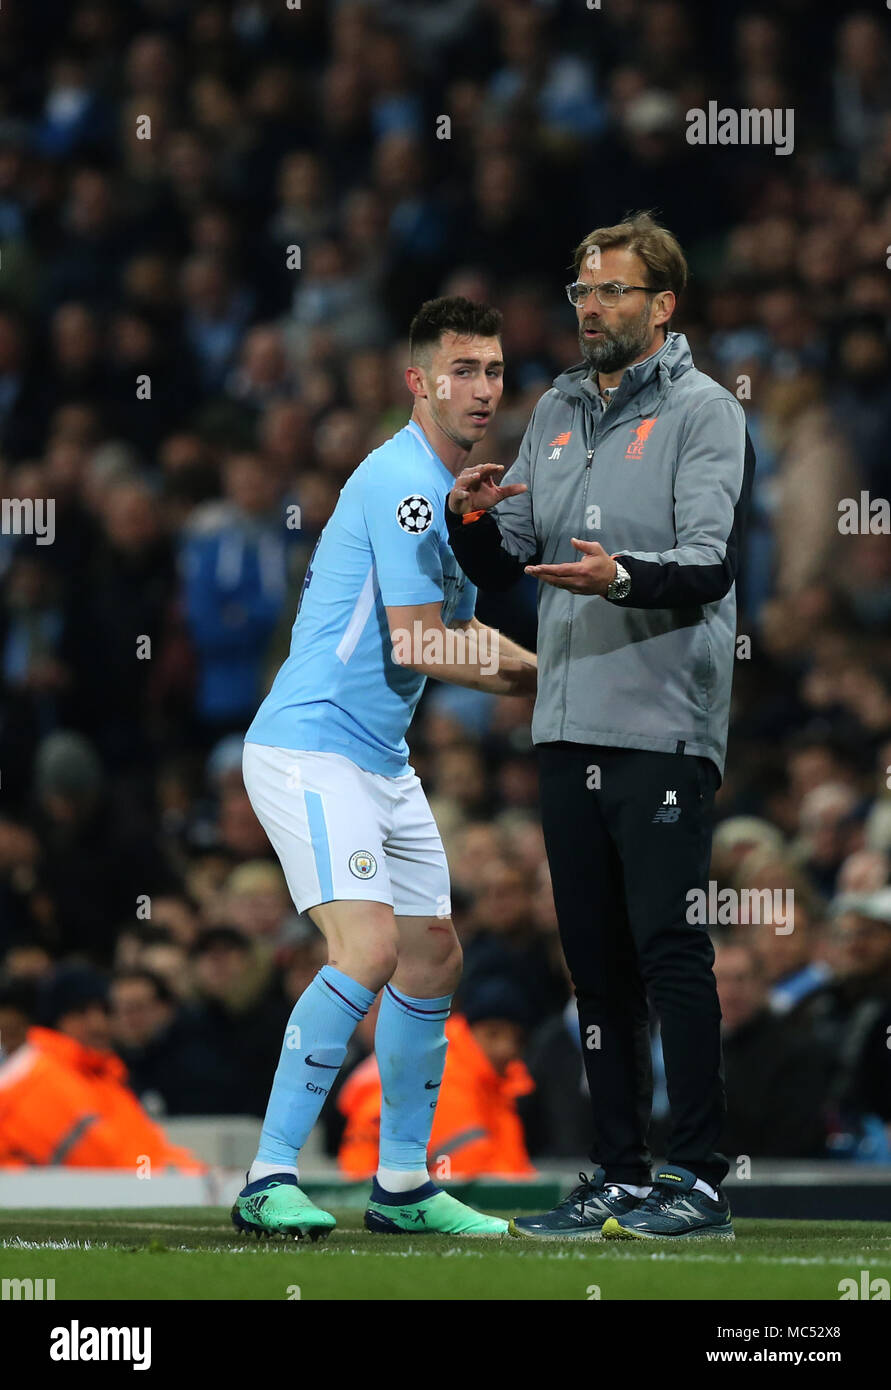 MANCHESTER, ENGLAND - APRIL 10: Jurgen Klopp during the Champions League quarter final second leg match between Manchester City and Liverpool at the Etihad Stadium on April 10, 2018 in Manchester, United Kingdom. Stock Photo